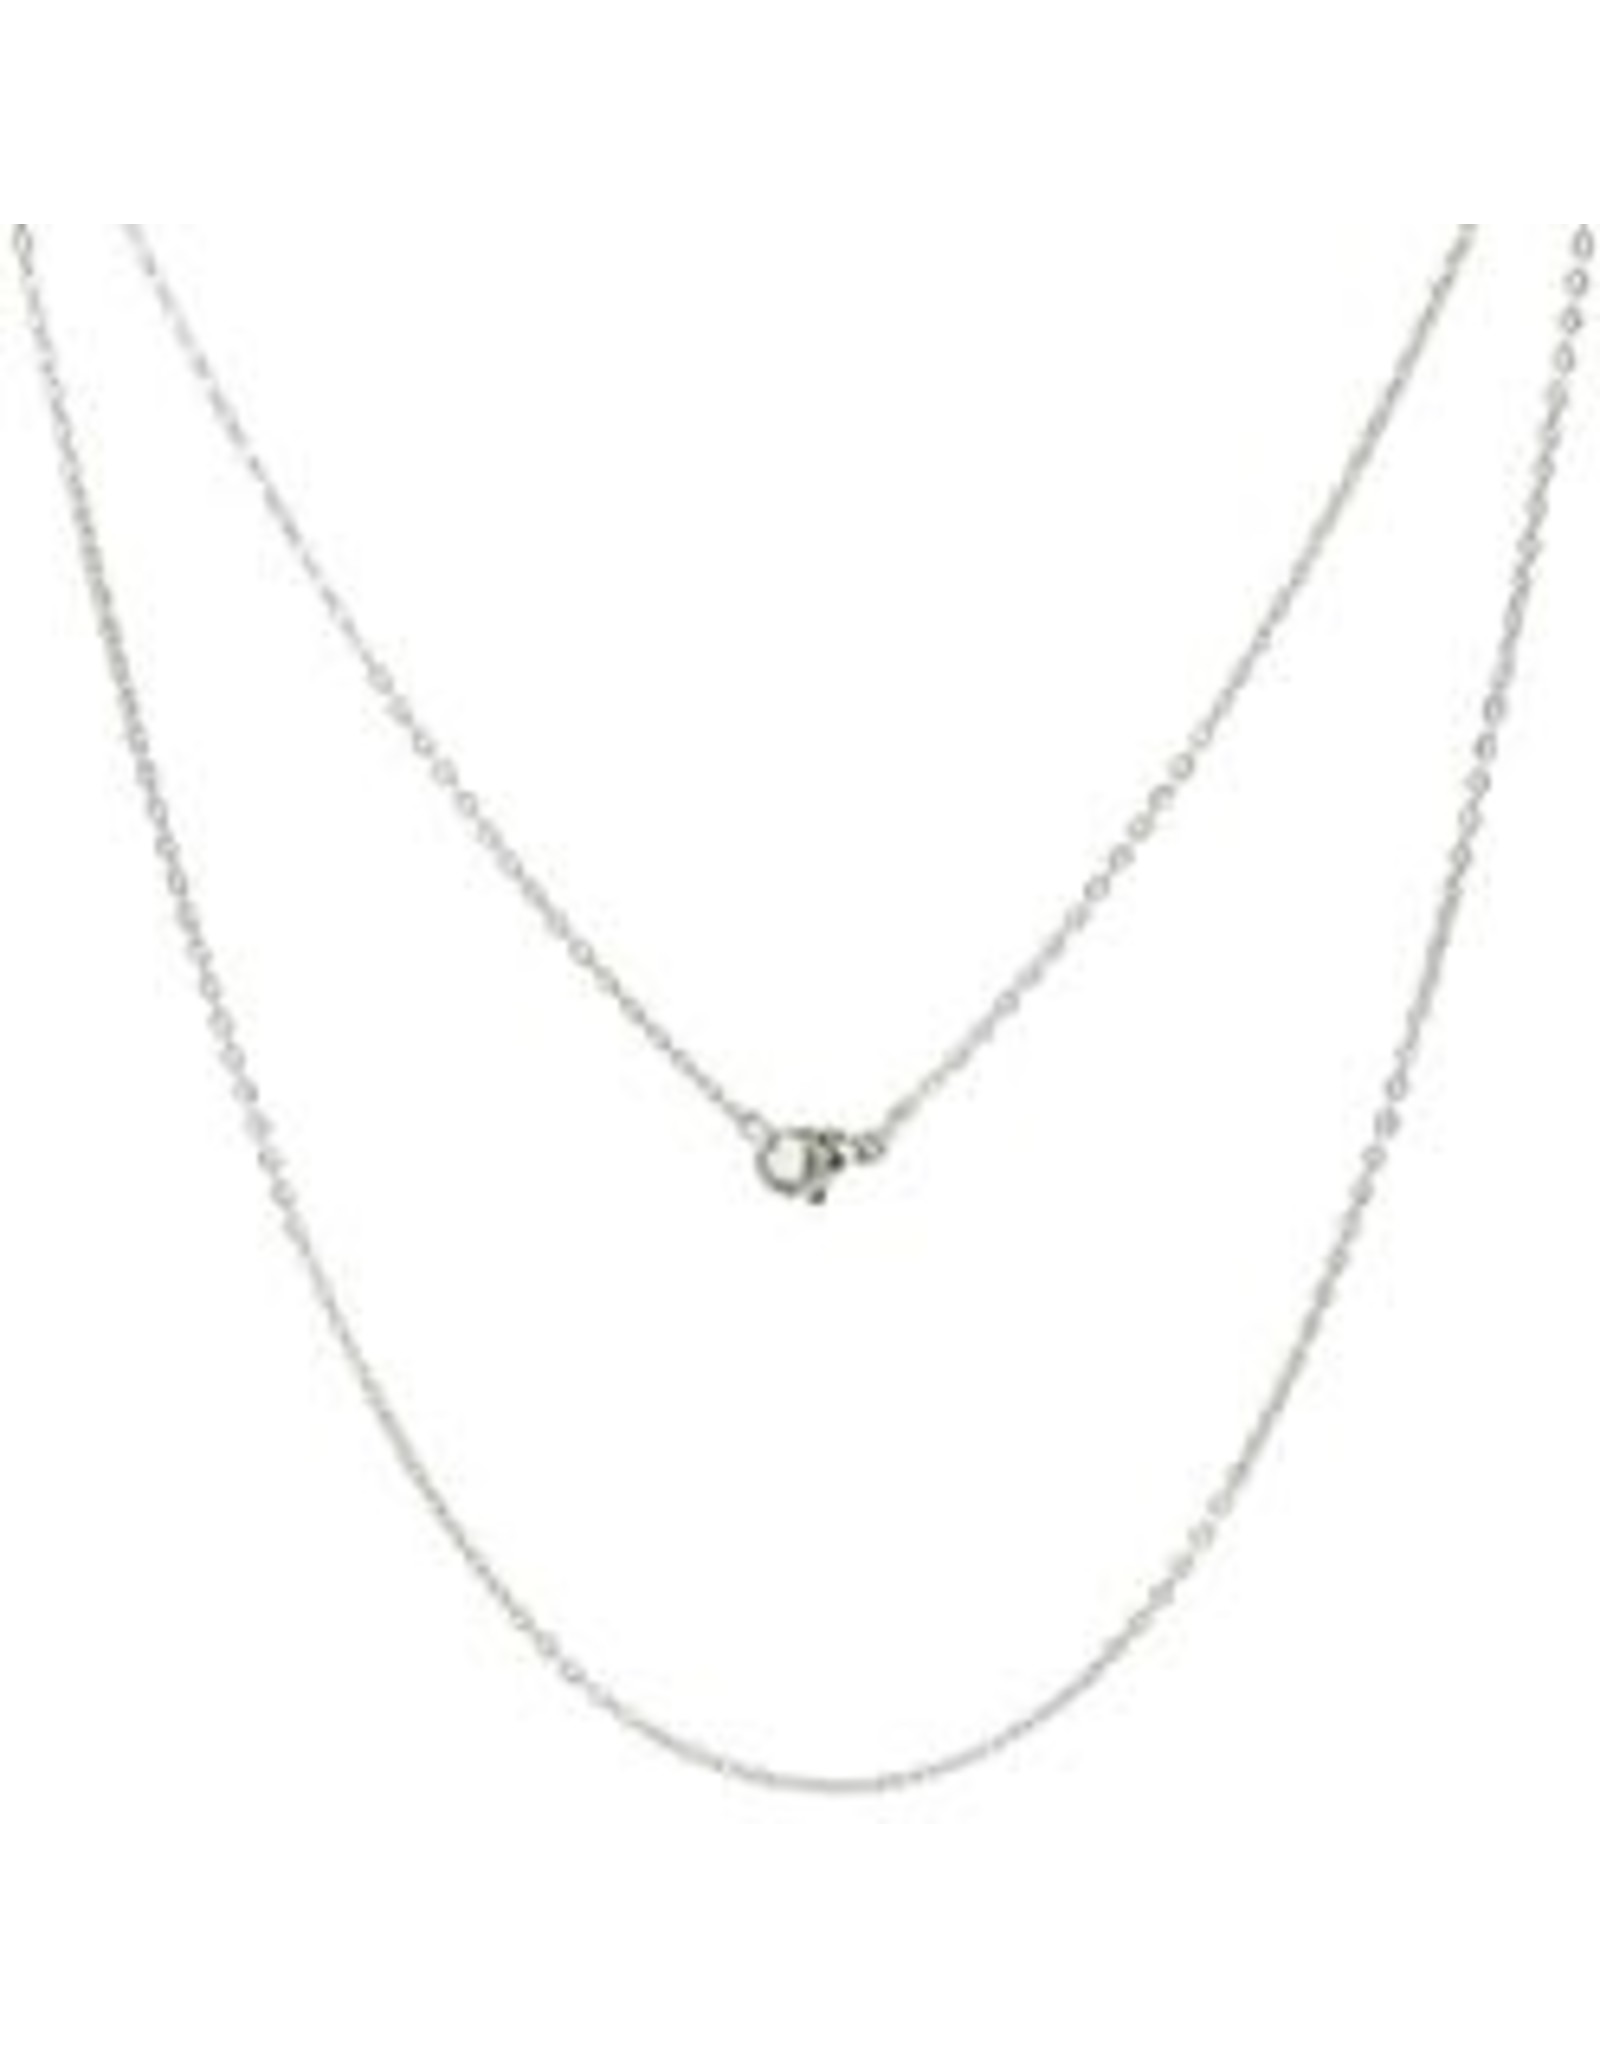 Stainless Steel  Necklace  2.3x1.8mm  19.5'' x1